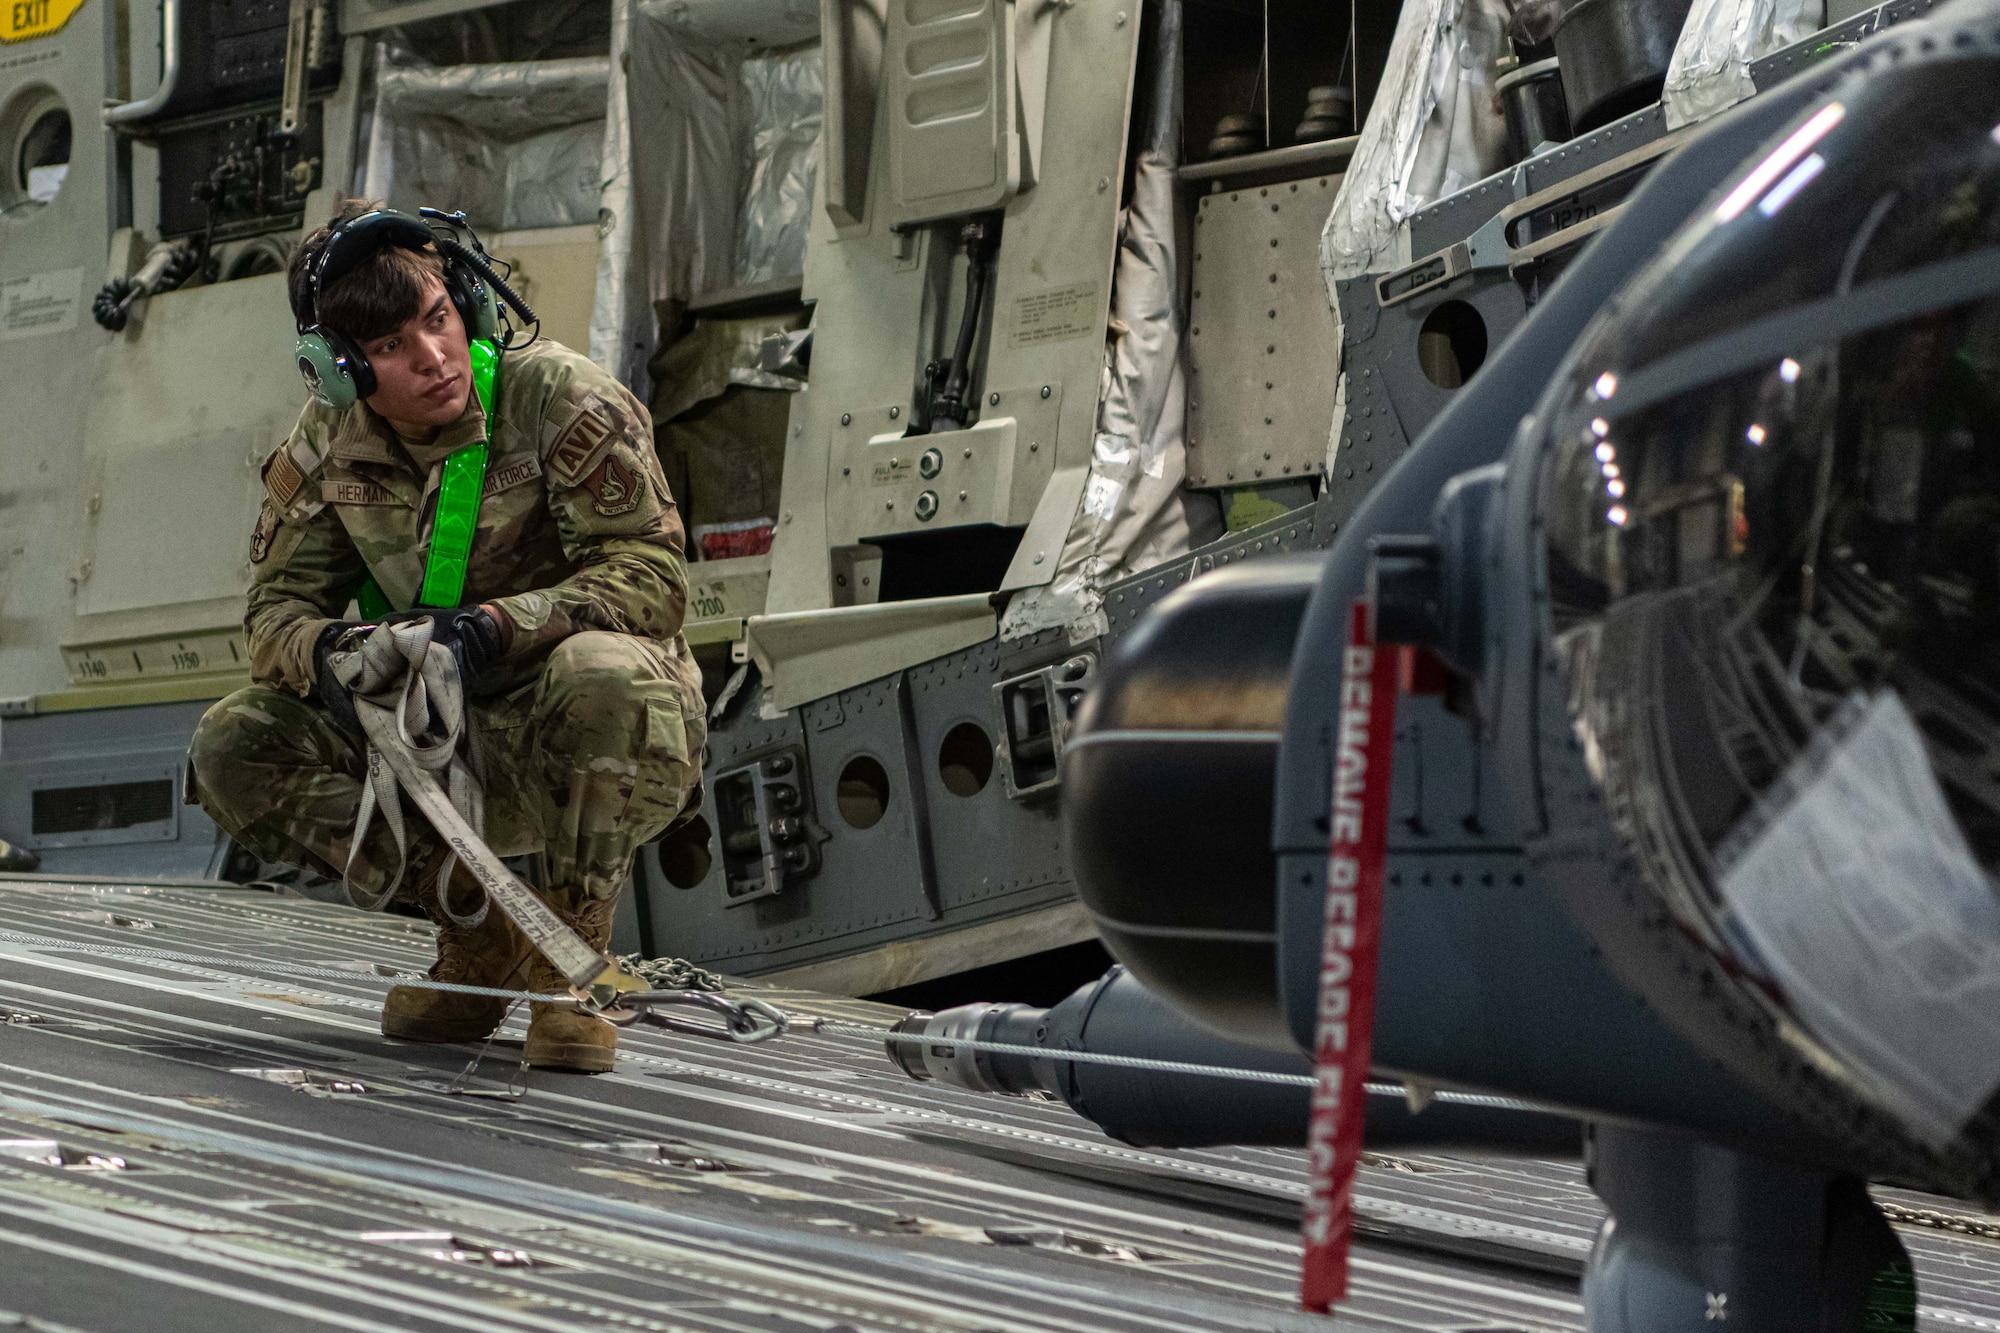 An HH-60 avionics apprentice conducts offloading operations.